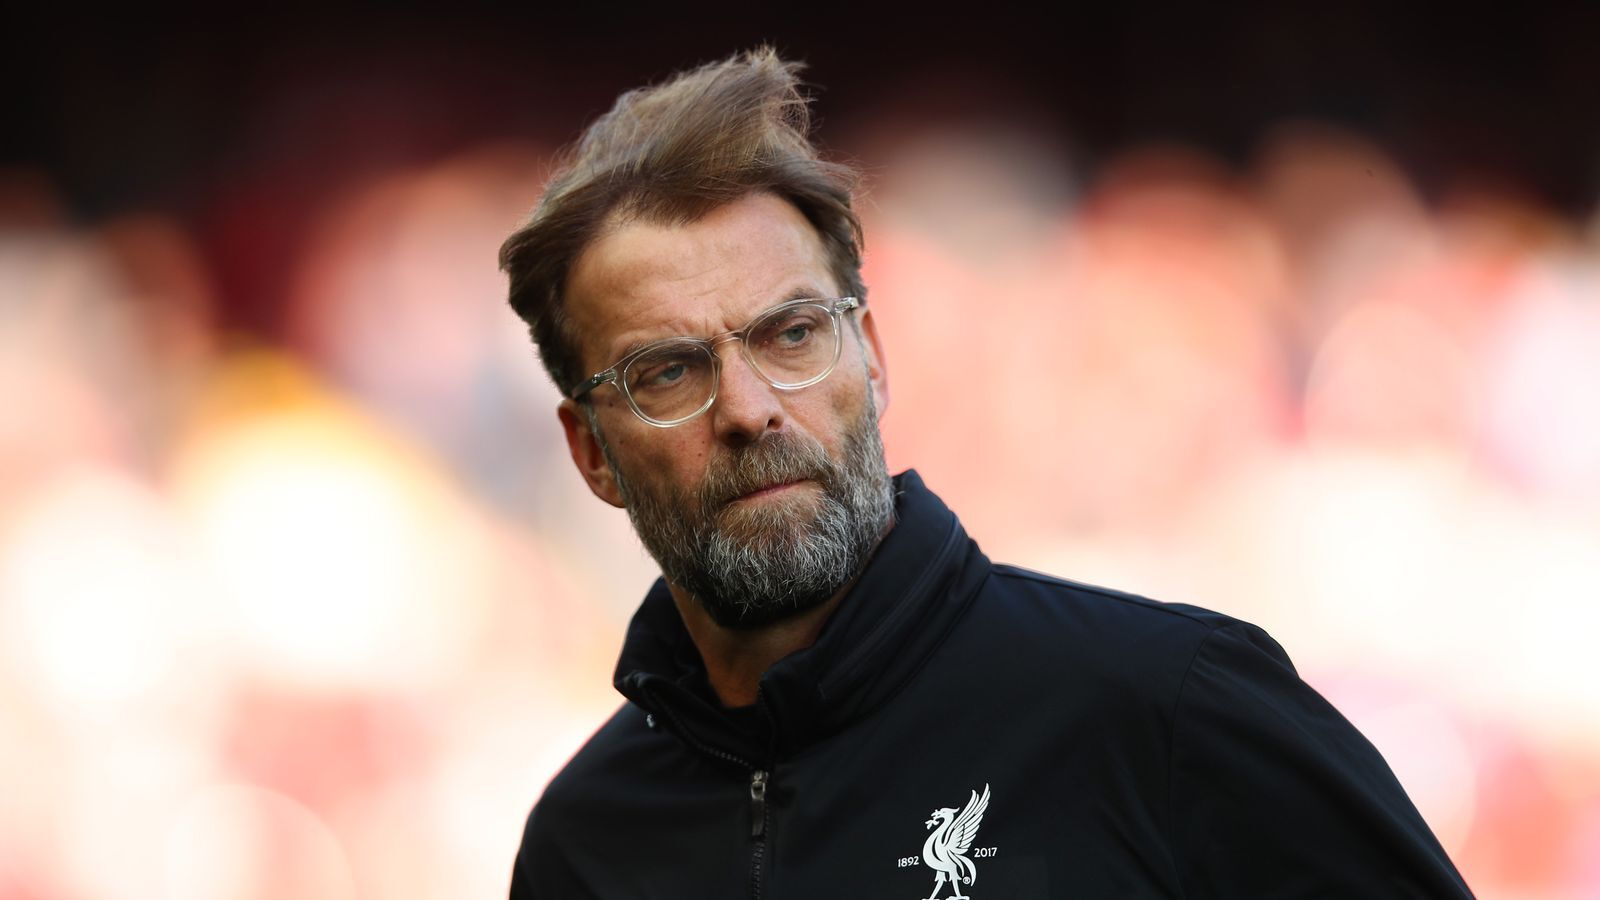 Jurgen Klopp can’t predict a time of domination